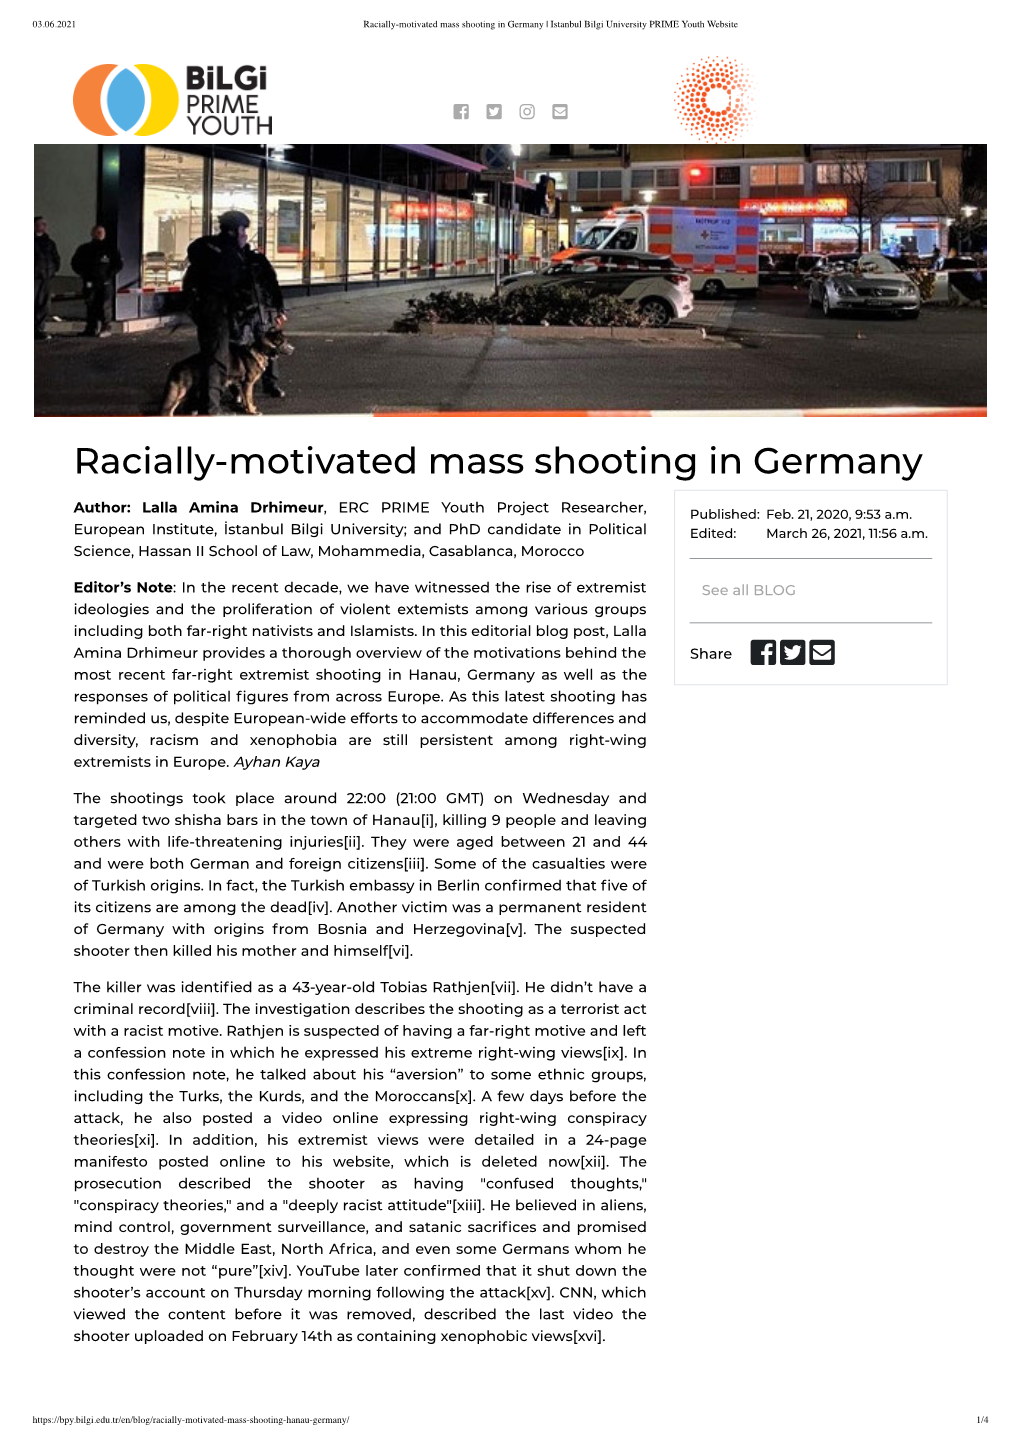 Racially-Motivated Mass Shooting in Germany | Istanbul Bilgi University PRIME Youth Website